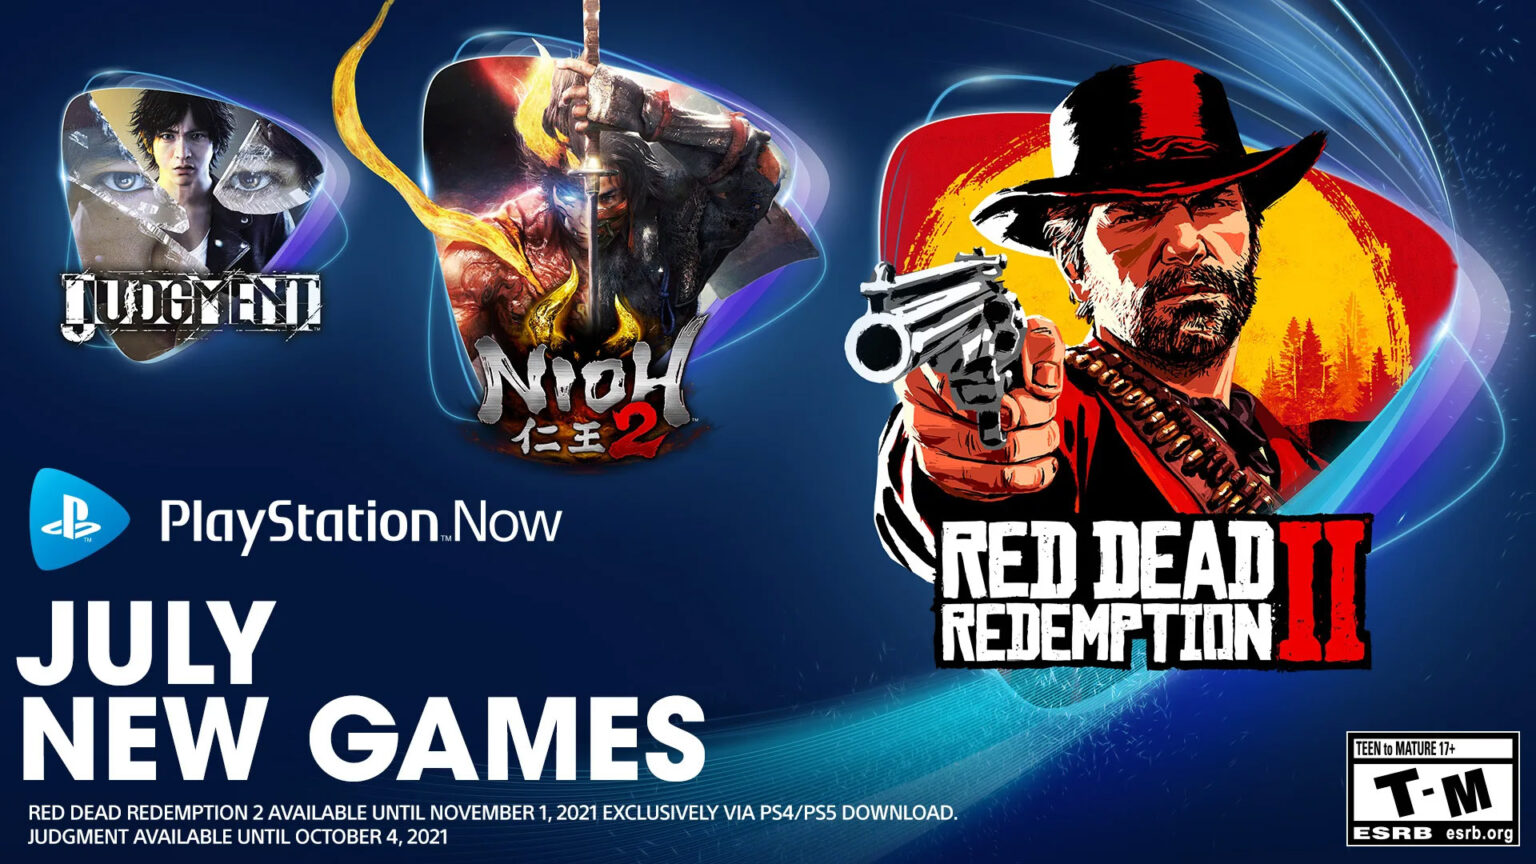 PlayStation Now tháng 7 bổ sung God of War, Judgment, Nioh 2, Red Dead Redemption 2